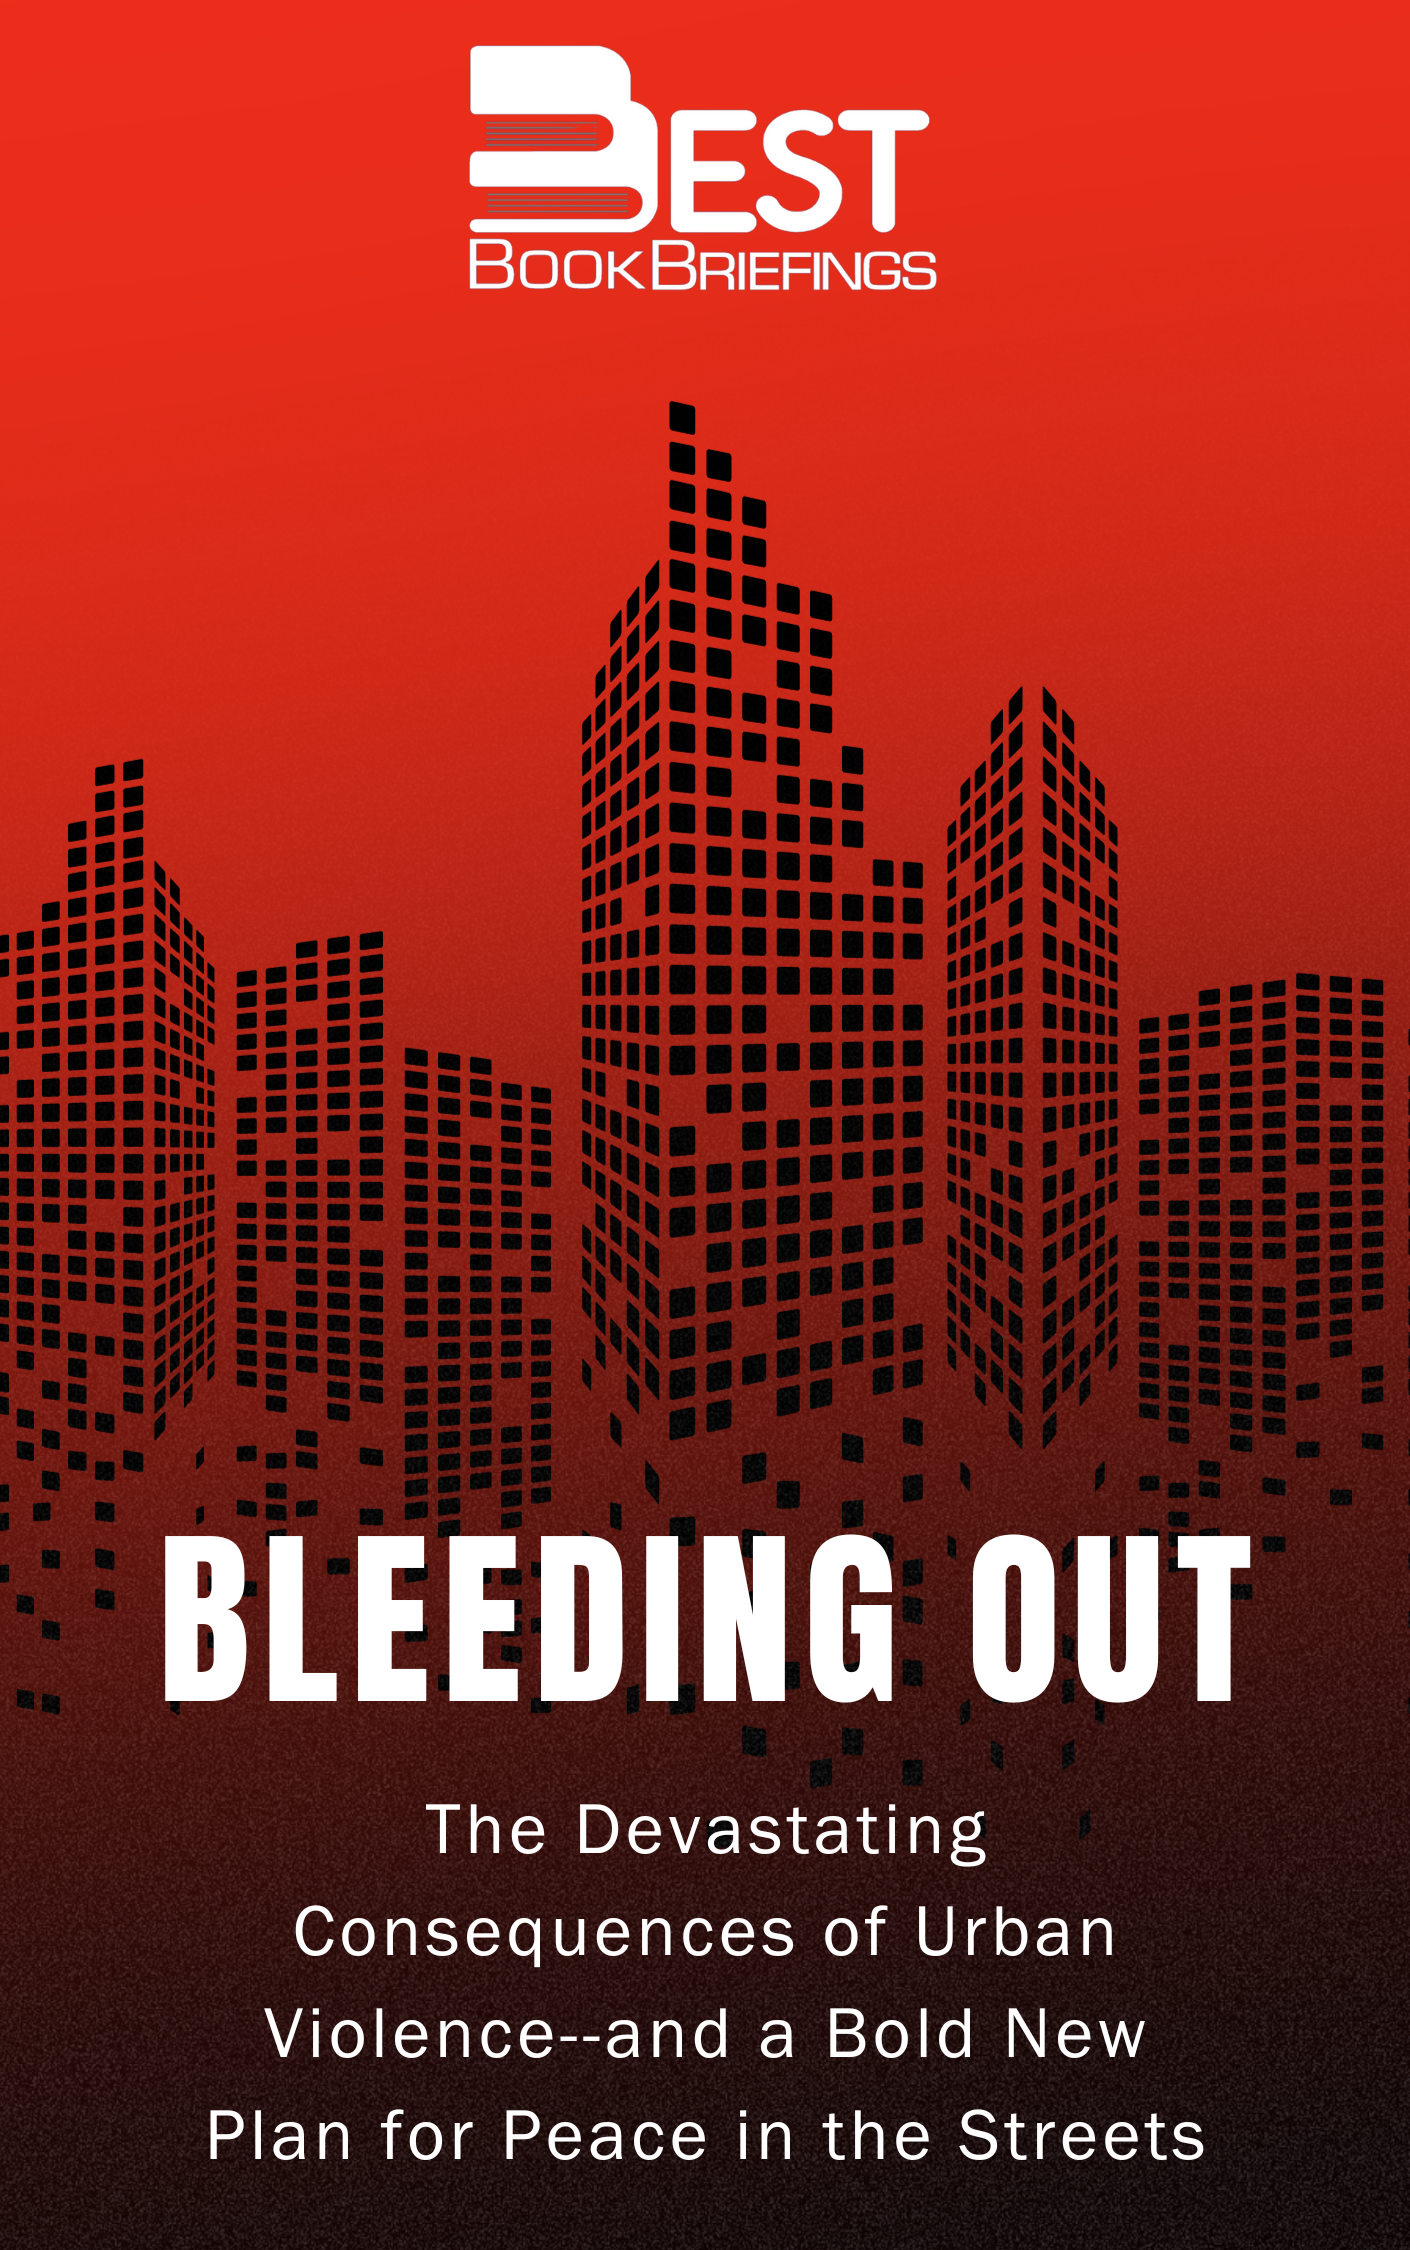 Urban violence is one of the most divisive and allegedly intractable issues of our time. But as Harvard scholar Thomas Abt shows in Bleeding Out, we actually possess all the tools necessary to stem violence in our cities.Coupling the latest social science with firsthand experience as a crime fighter, Abt proposes a 